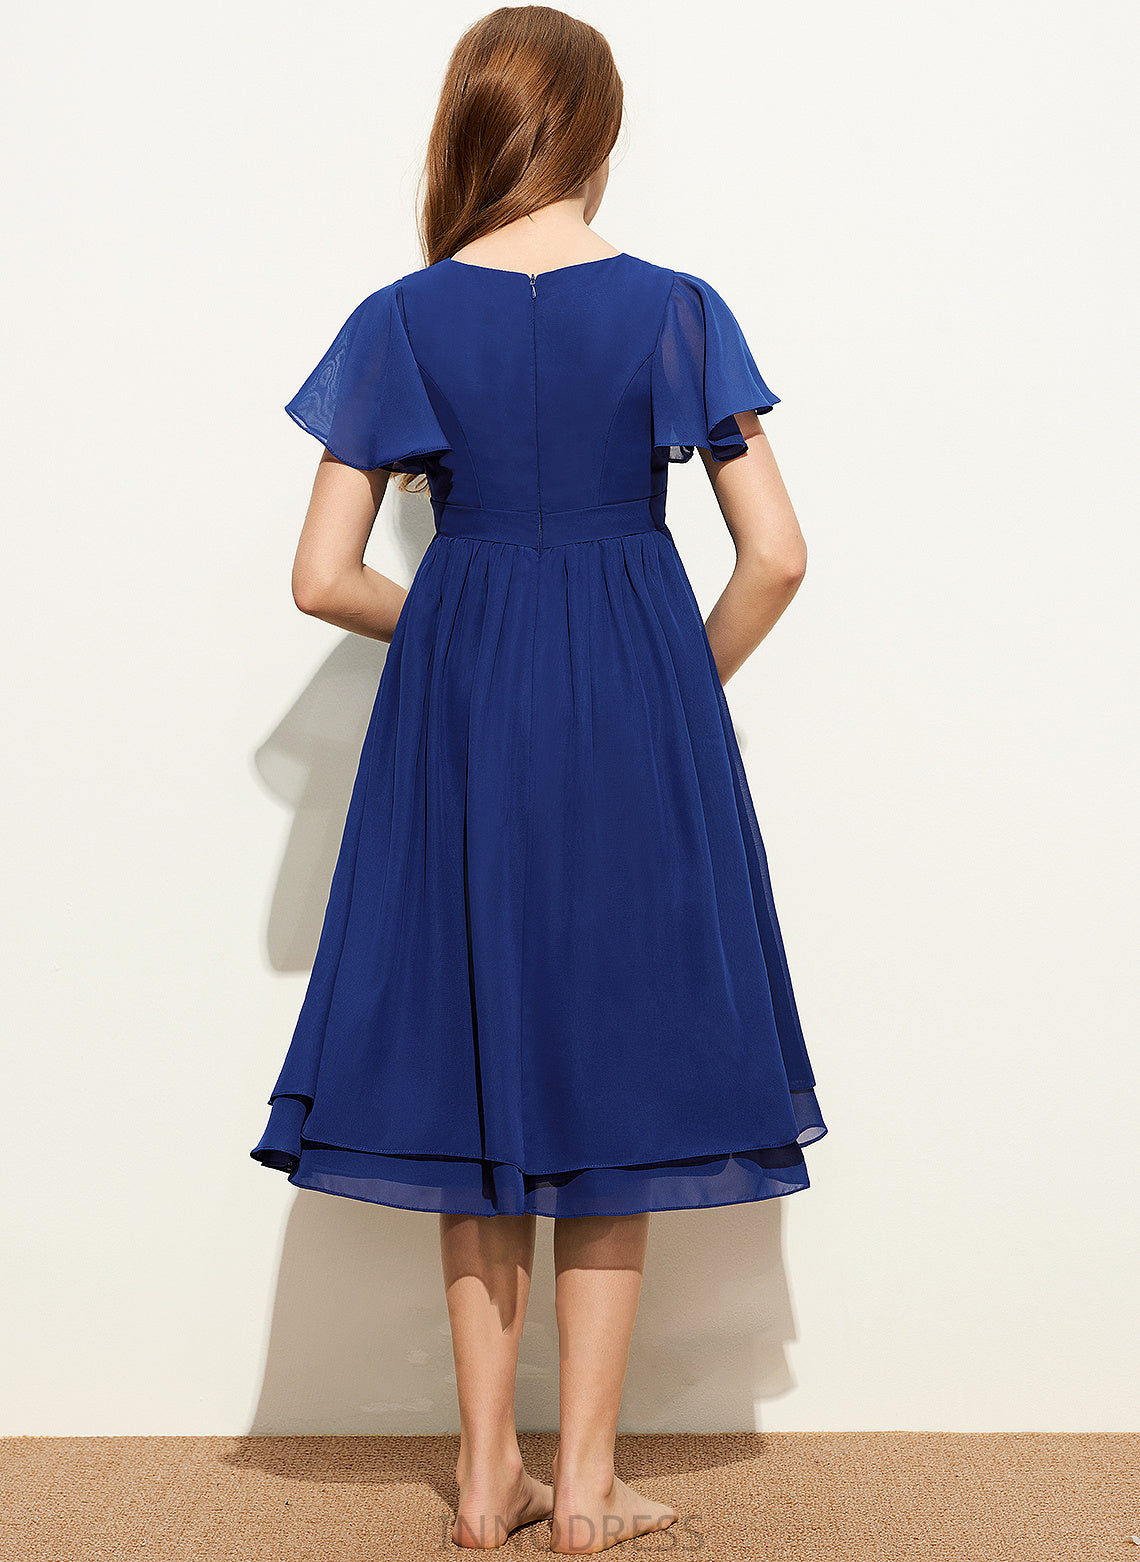 Bow(s) Neck Brittany With Scoop Chiffon Junior Bridesmaid Dresses Knee-Length A-Line